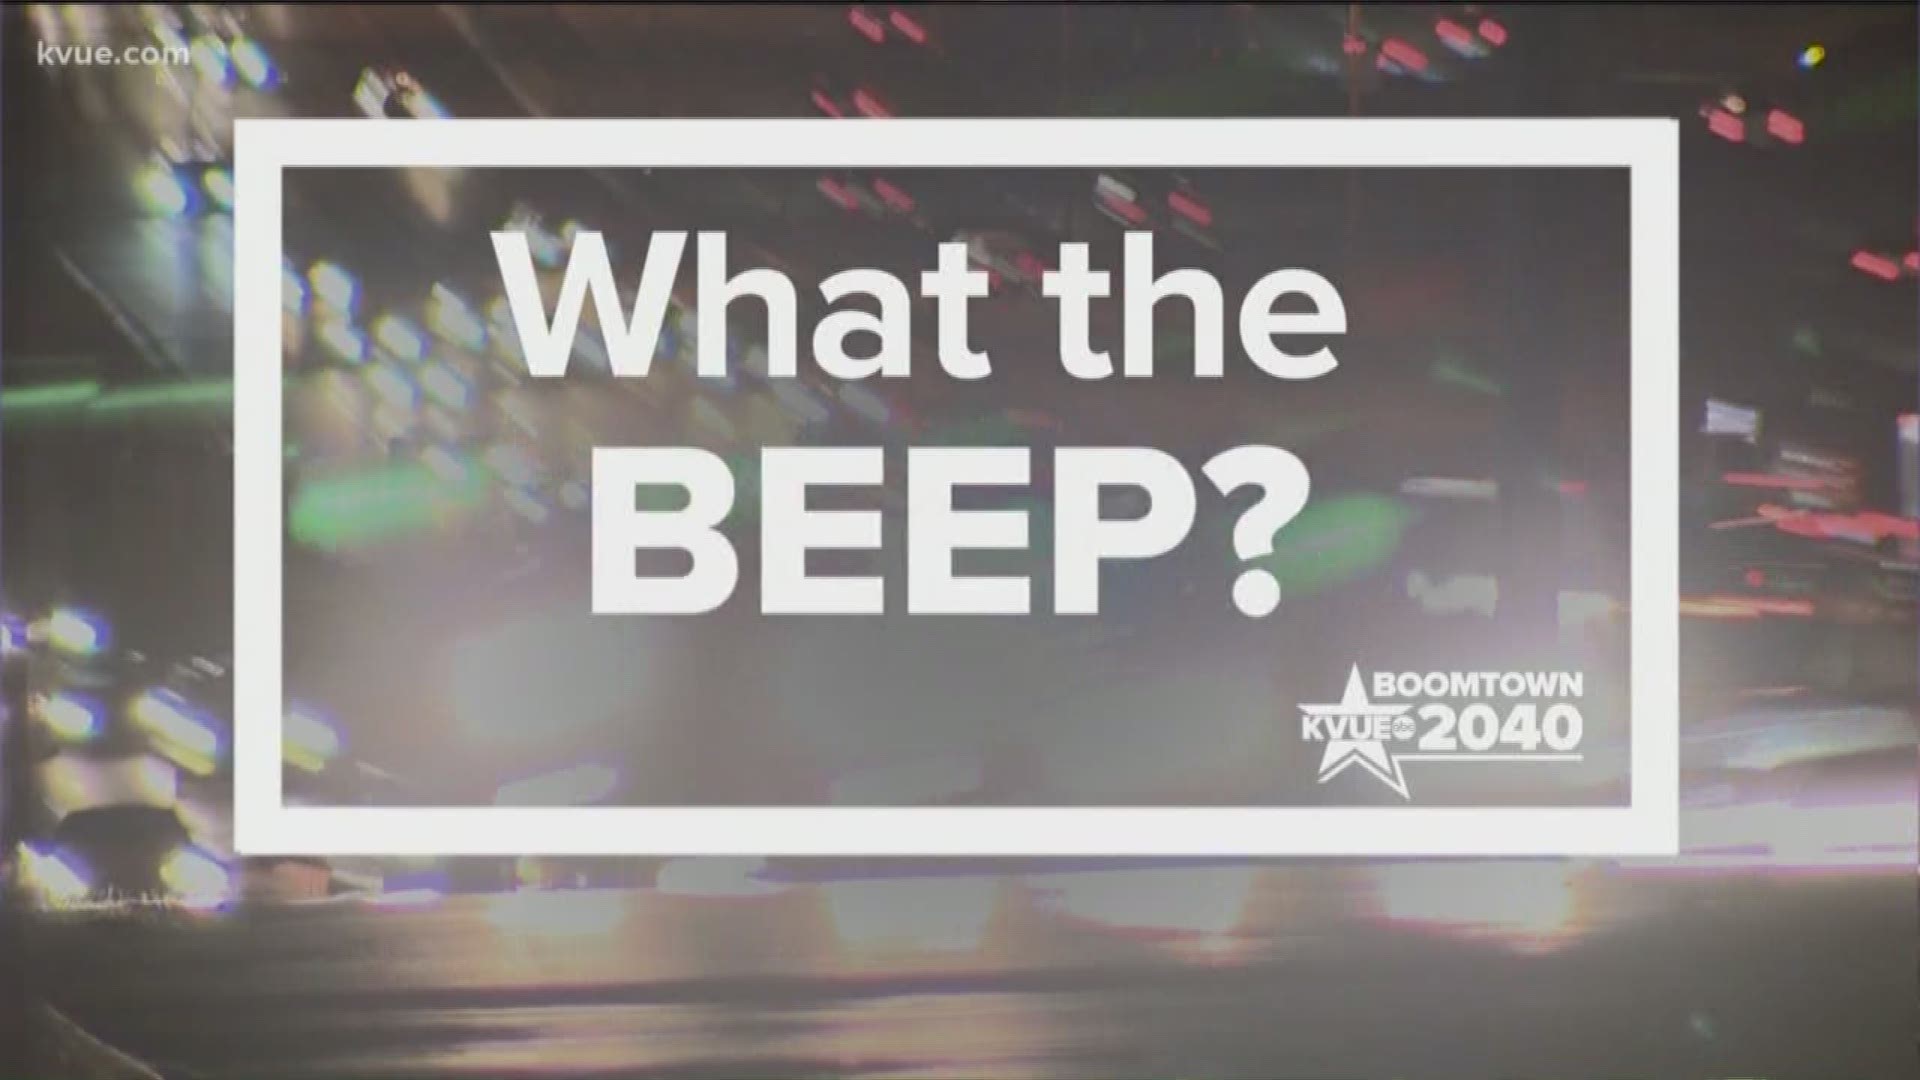 You give us your traffic questions and we get answers. Viewer James reached out asking, "Why is Austin the only city I can think of that reduces the number of lanes on our highways at the downtown area?"